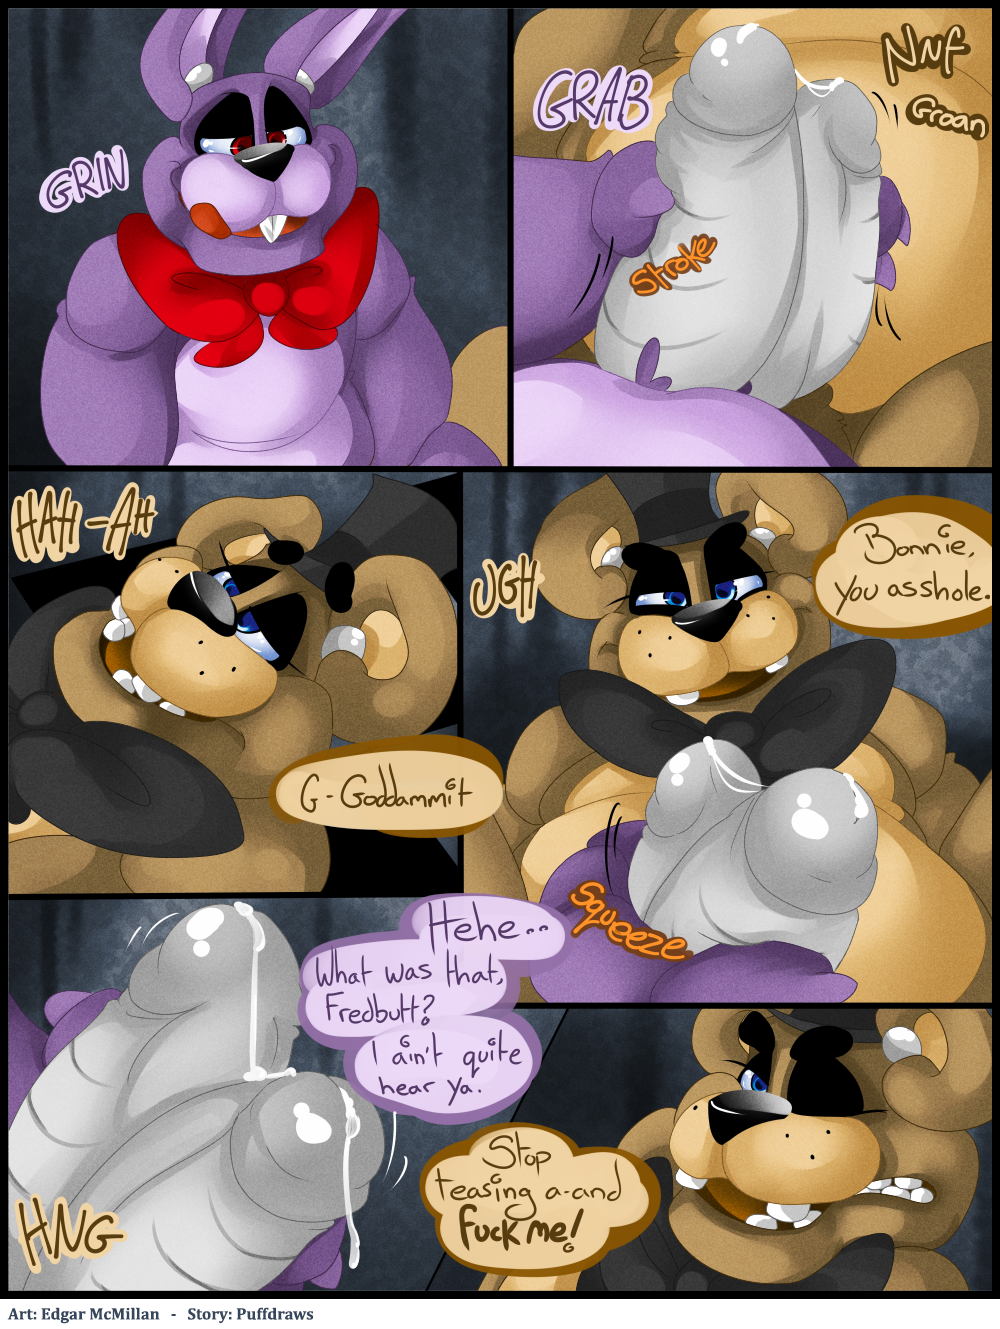 fight freddy's nights at Five nights at candy's sex